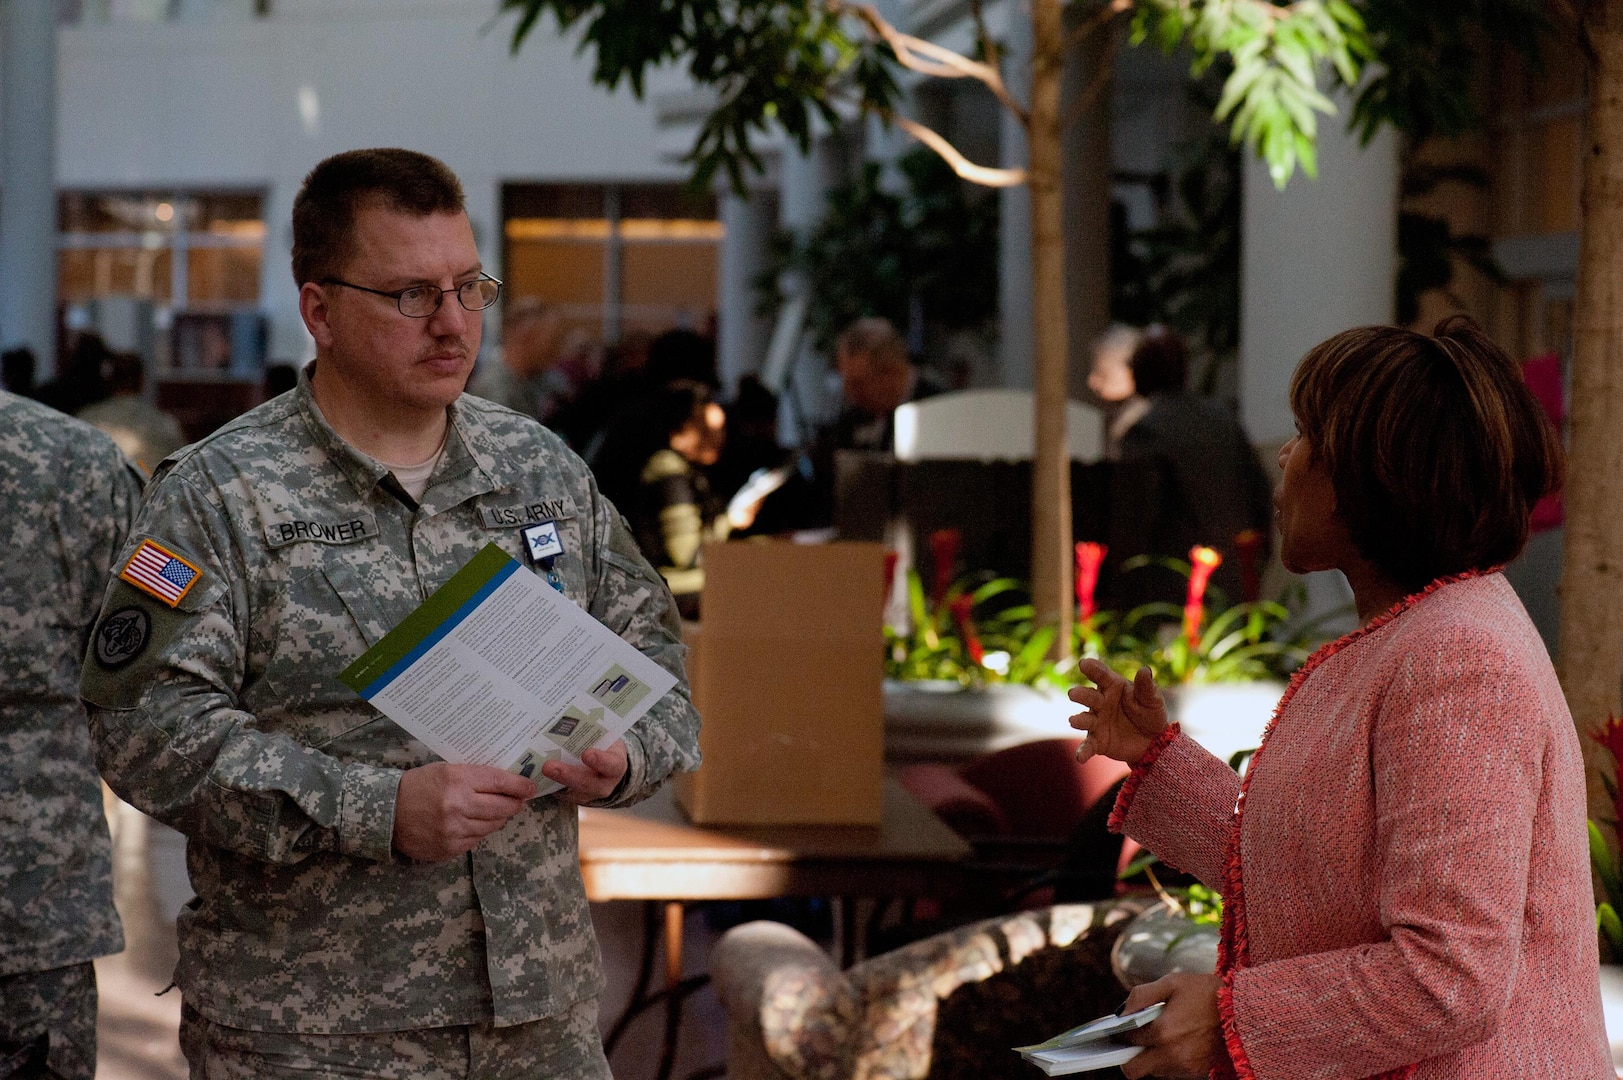 Sgt. 1st Class Brian Brower talks with a representative from one of several agencies geared toward financial readiness that took part in the Military Saves kick off event at the Army National Guard Readiness Center in Arlington, Va., Thursday, Jan. 30, 2014.